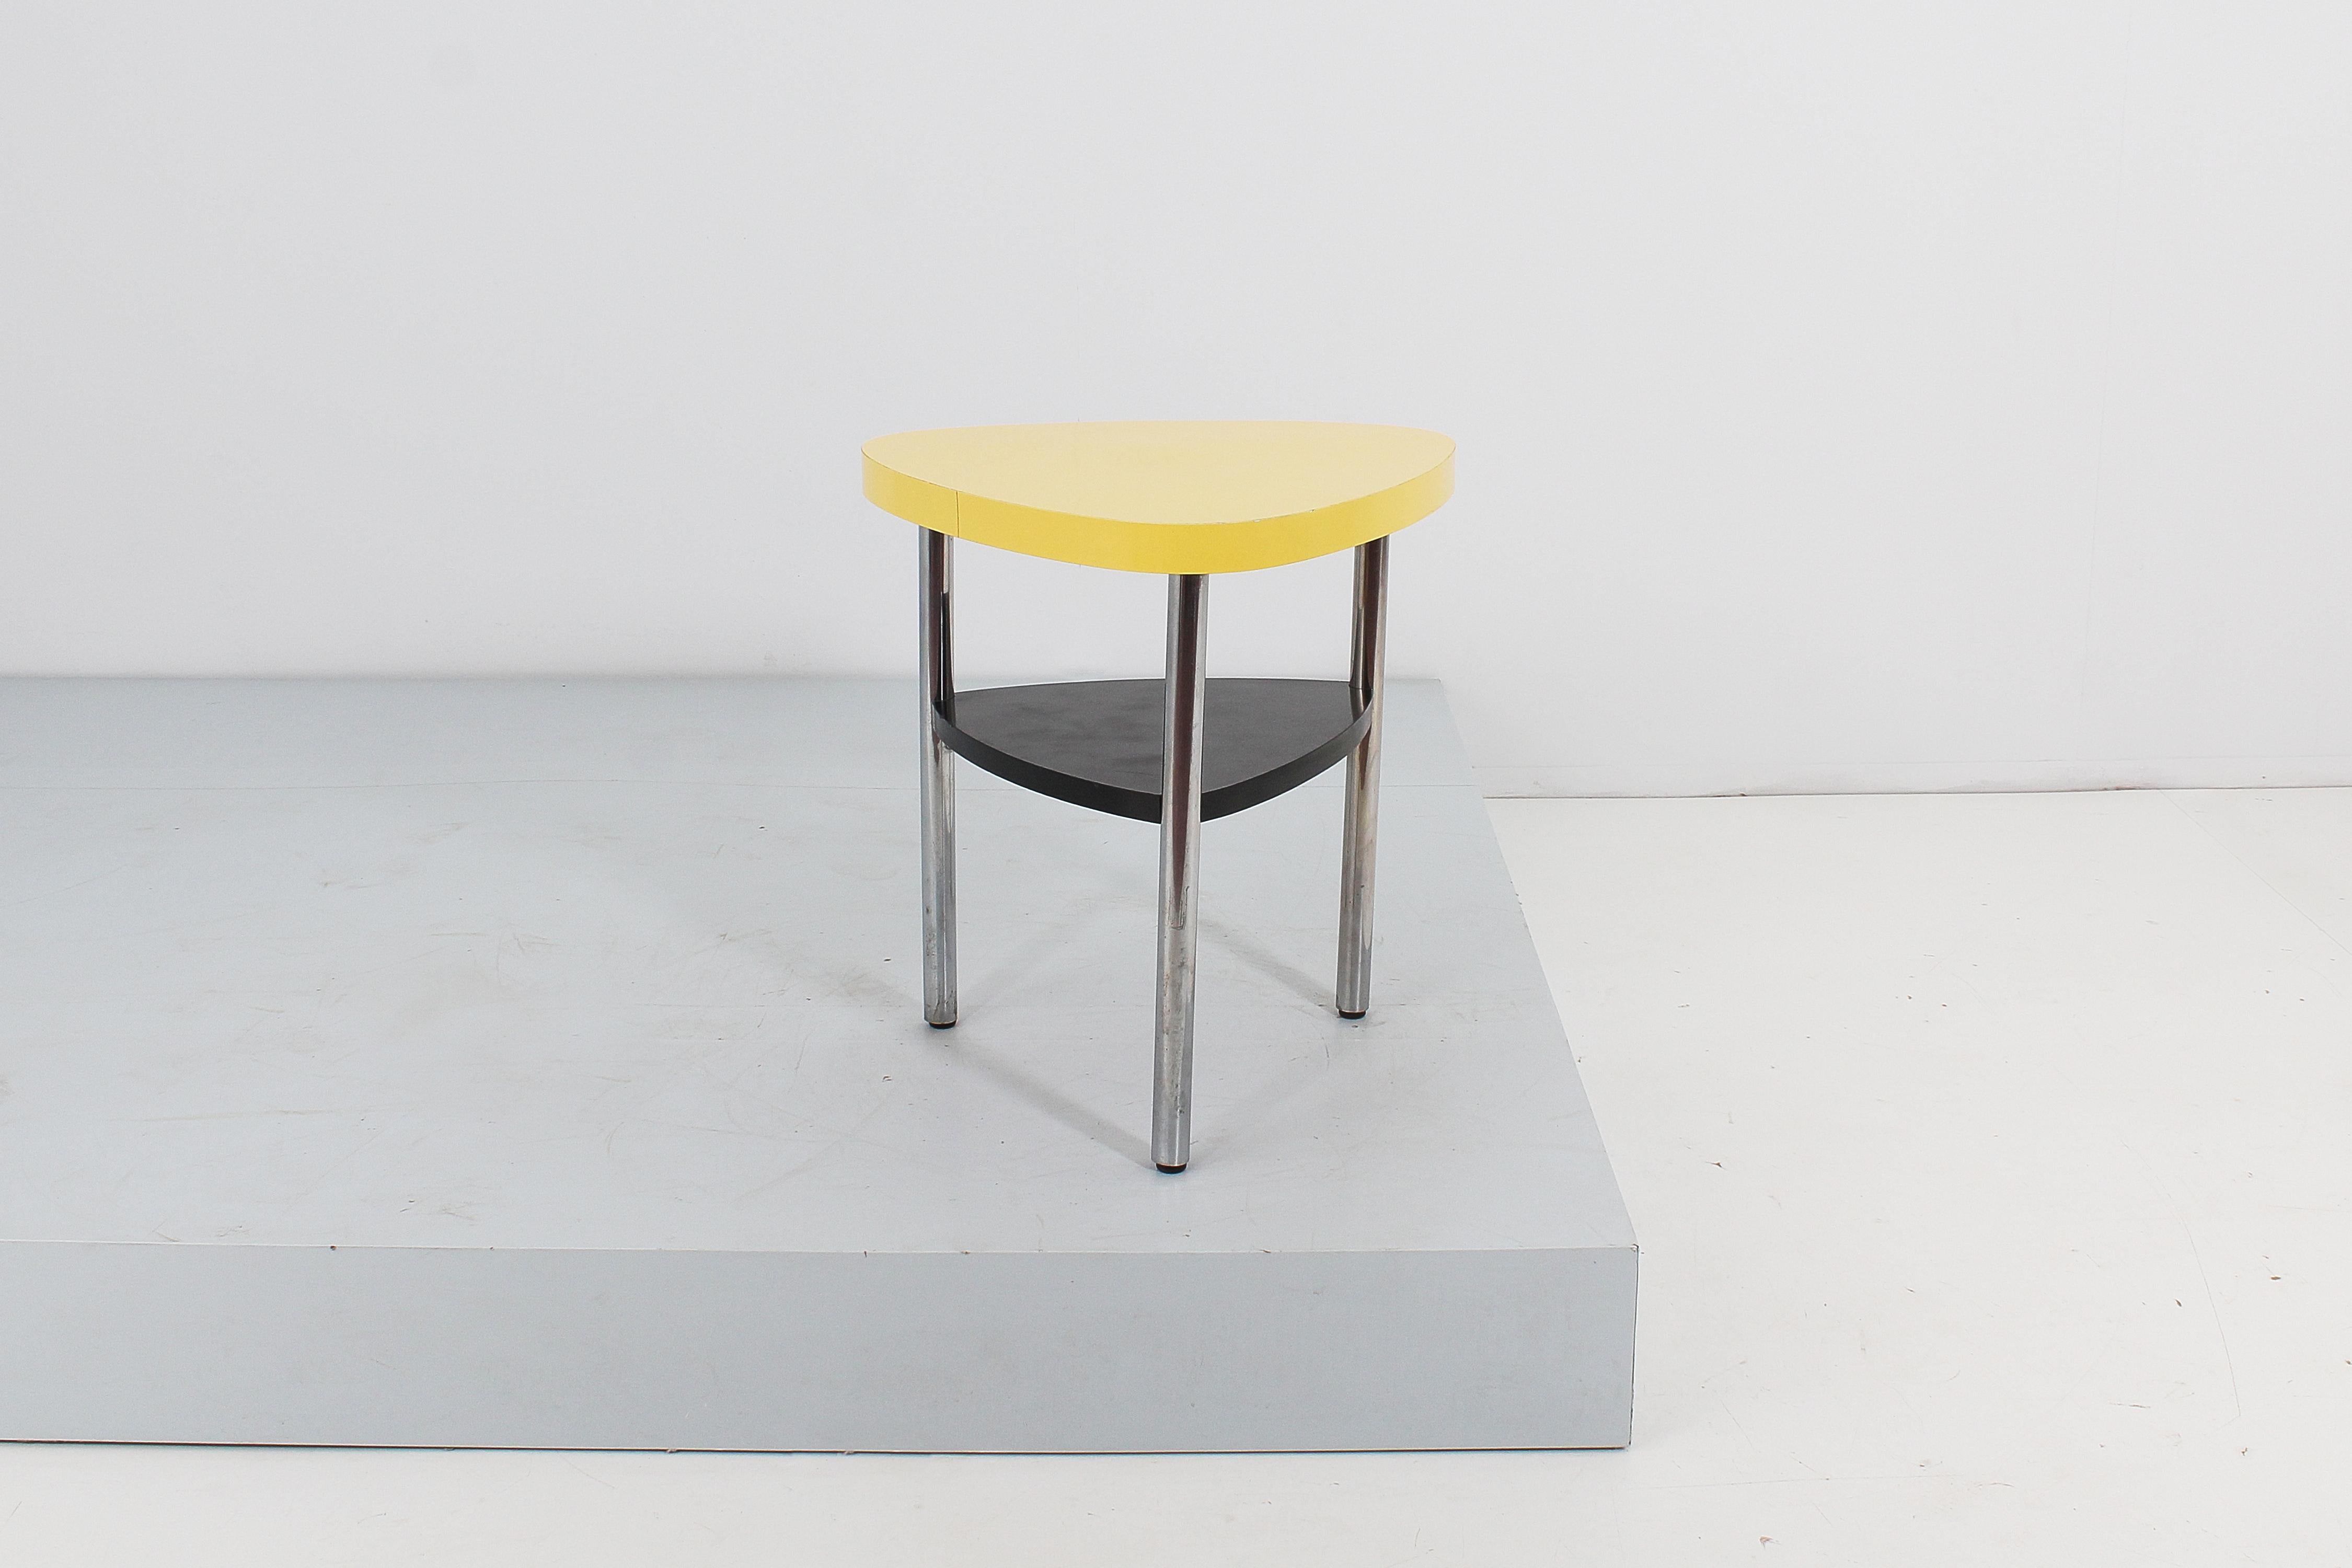 Triangular shaped coffee table with double wooden shelf covered in yellow (upper level) and black (lower level) Formica. Three tubular legs in chromed steel. In the style of Ettore Sottsass, Italian production from the 50s.
Wear consistent with age